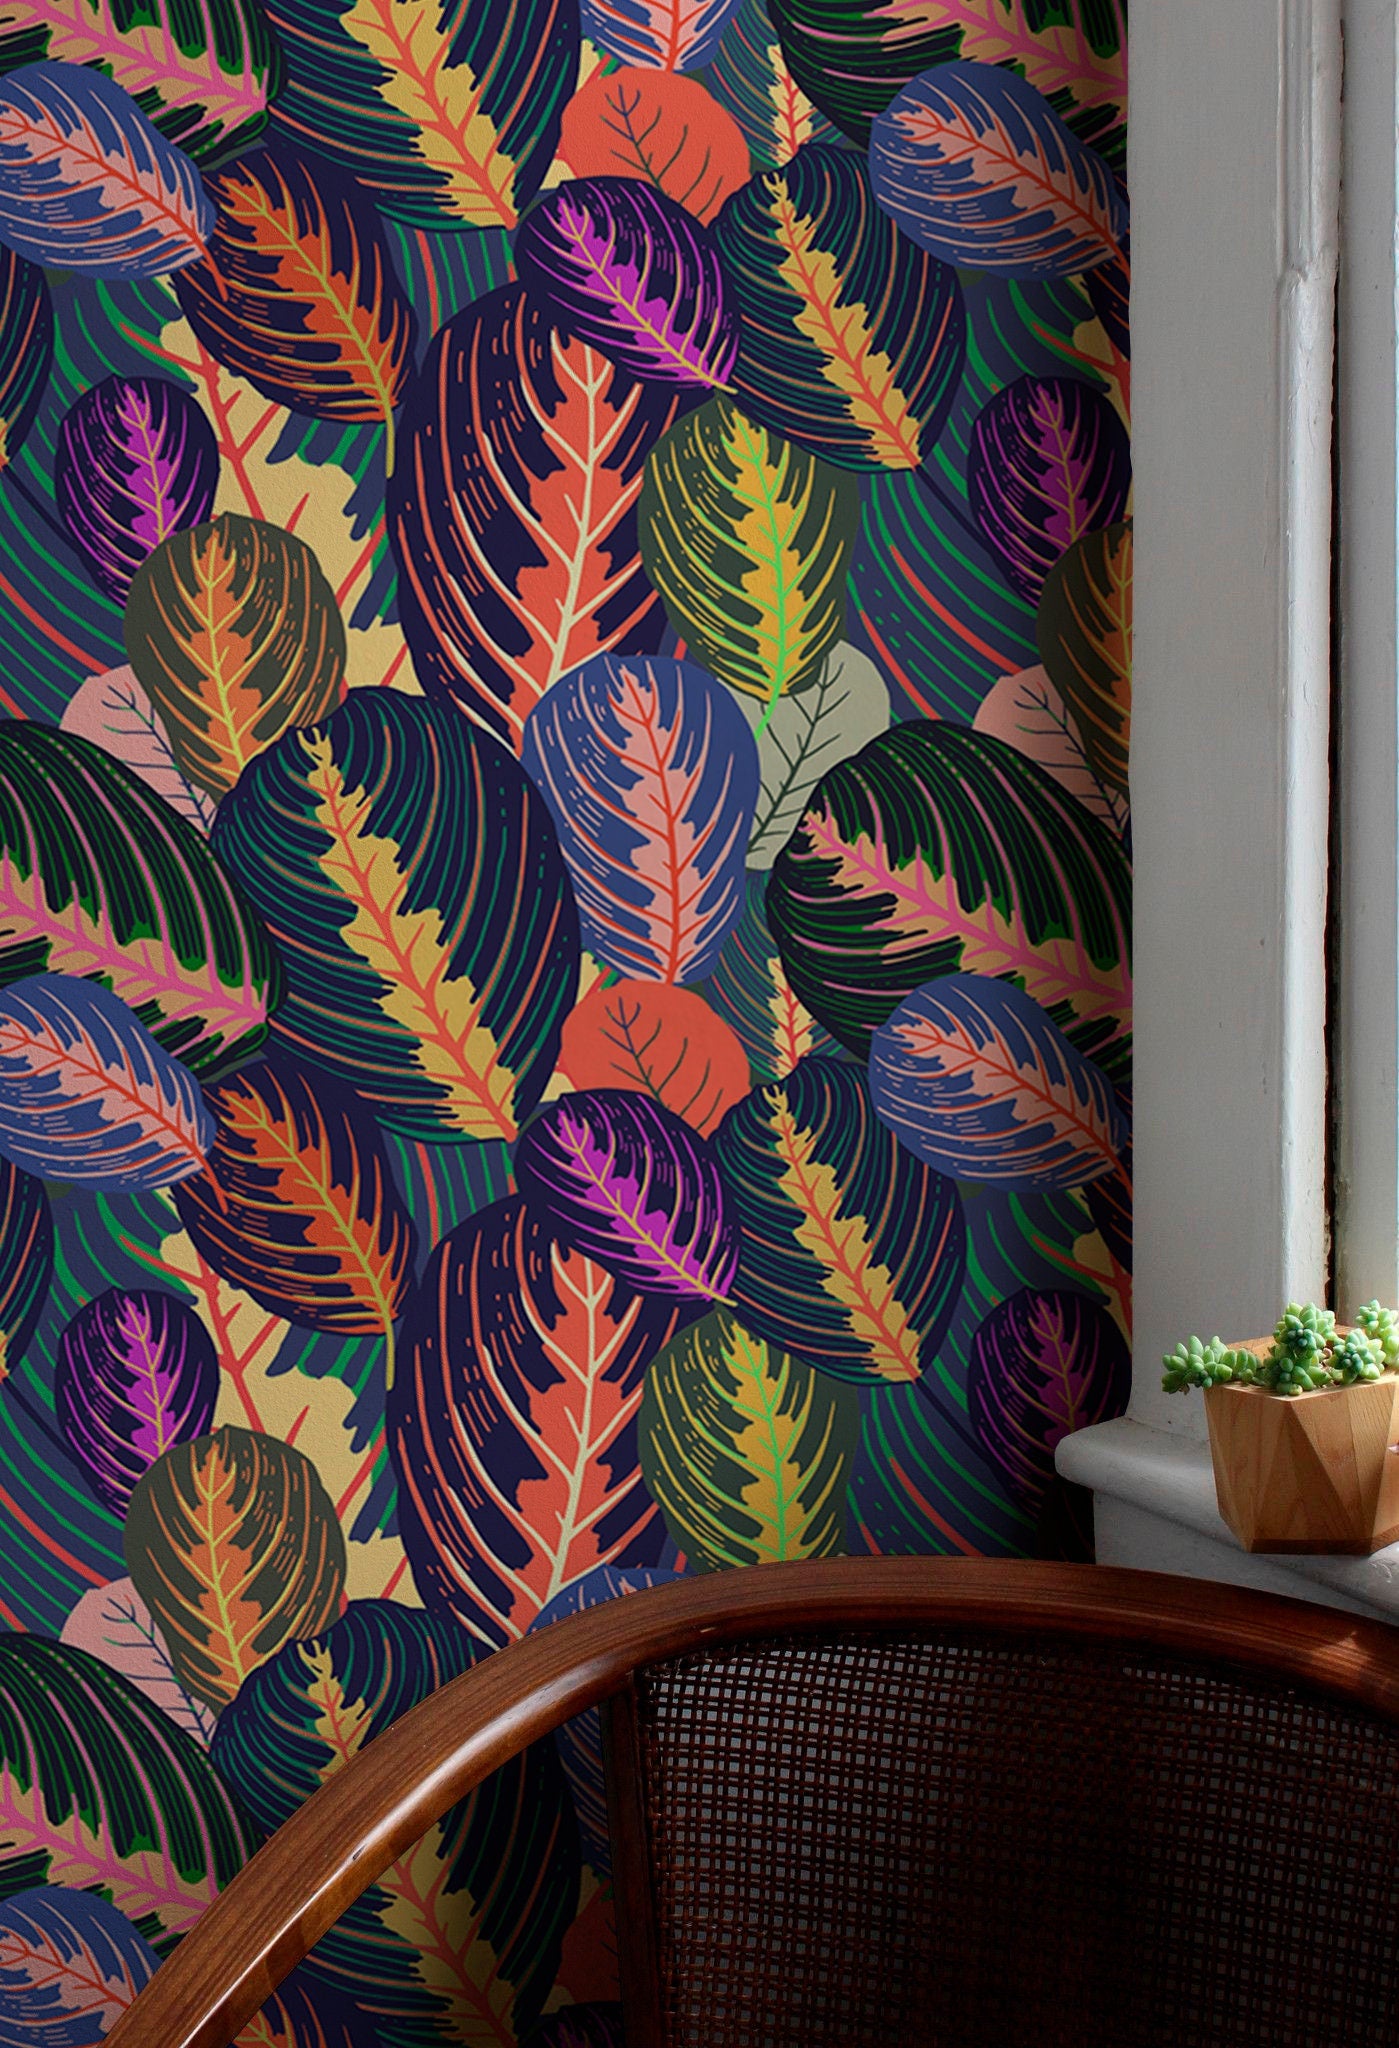 Wallpaper Removable Wallpaper Peel and Stick Wallpaper Wall Decor Home Decor Art Room Decor Wall Prints / Colorful Leaves Wallpaper - A796